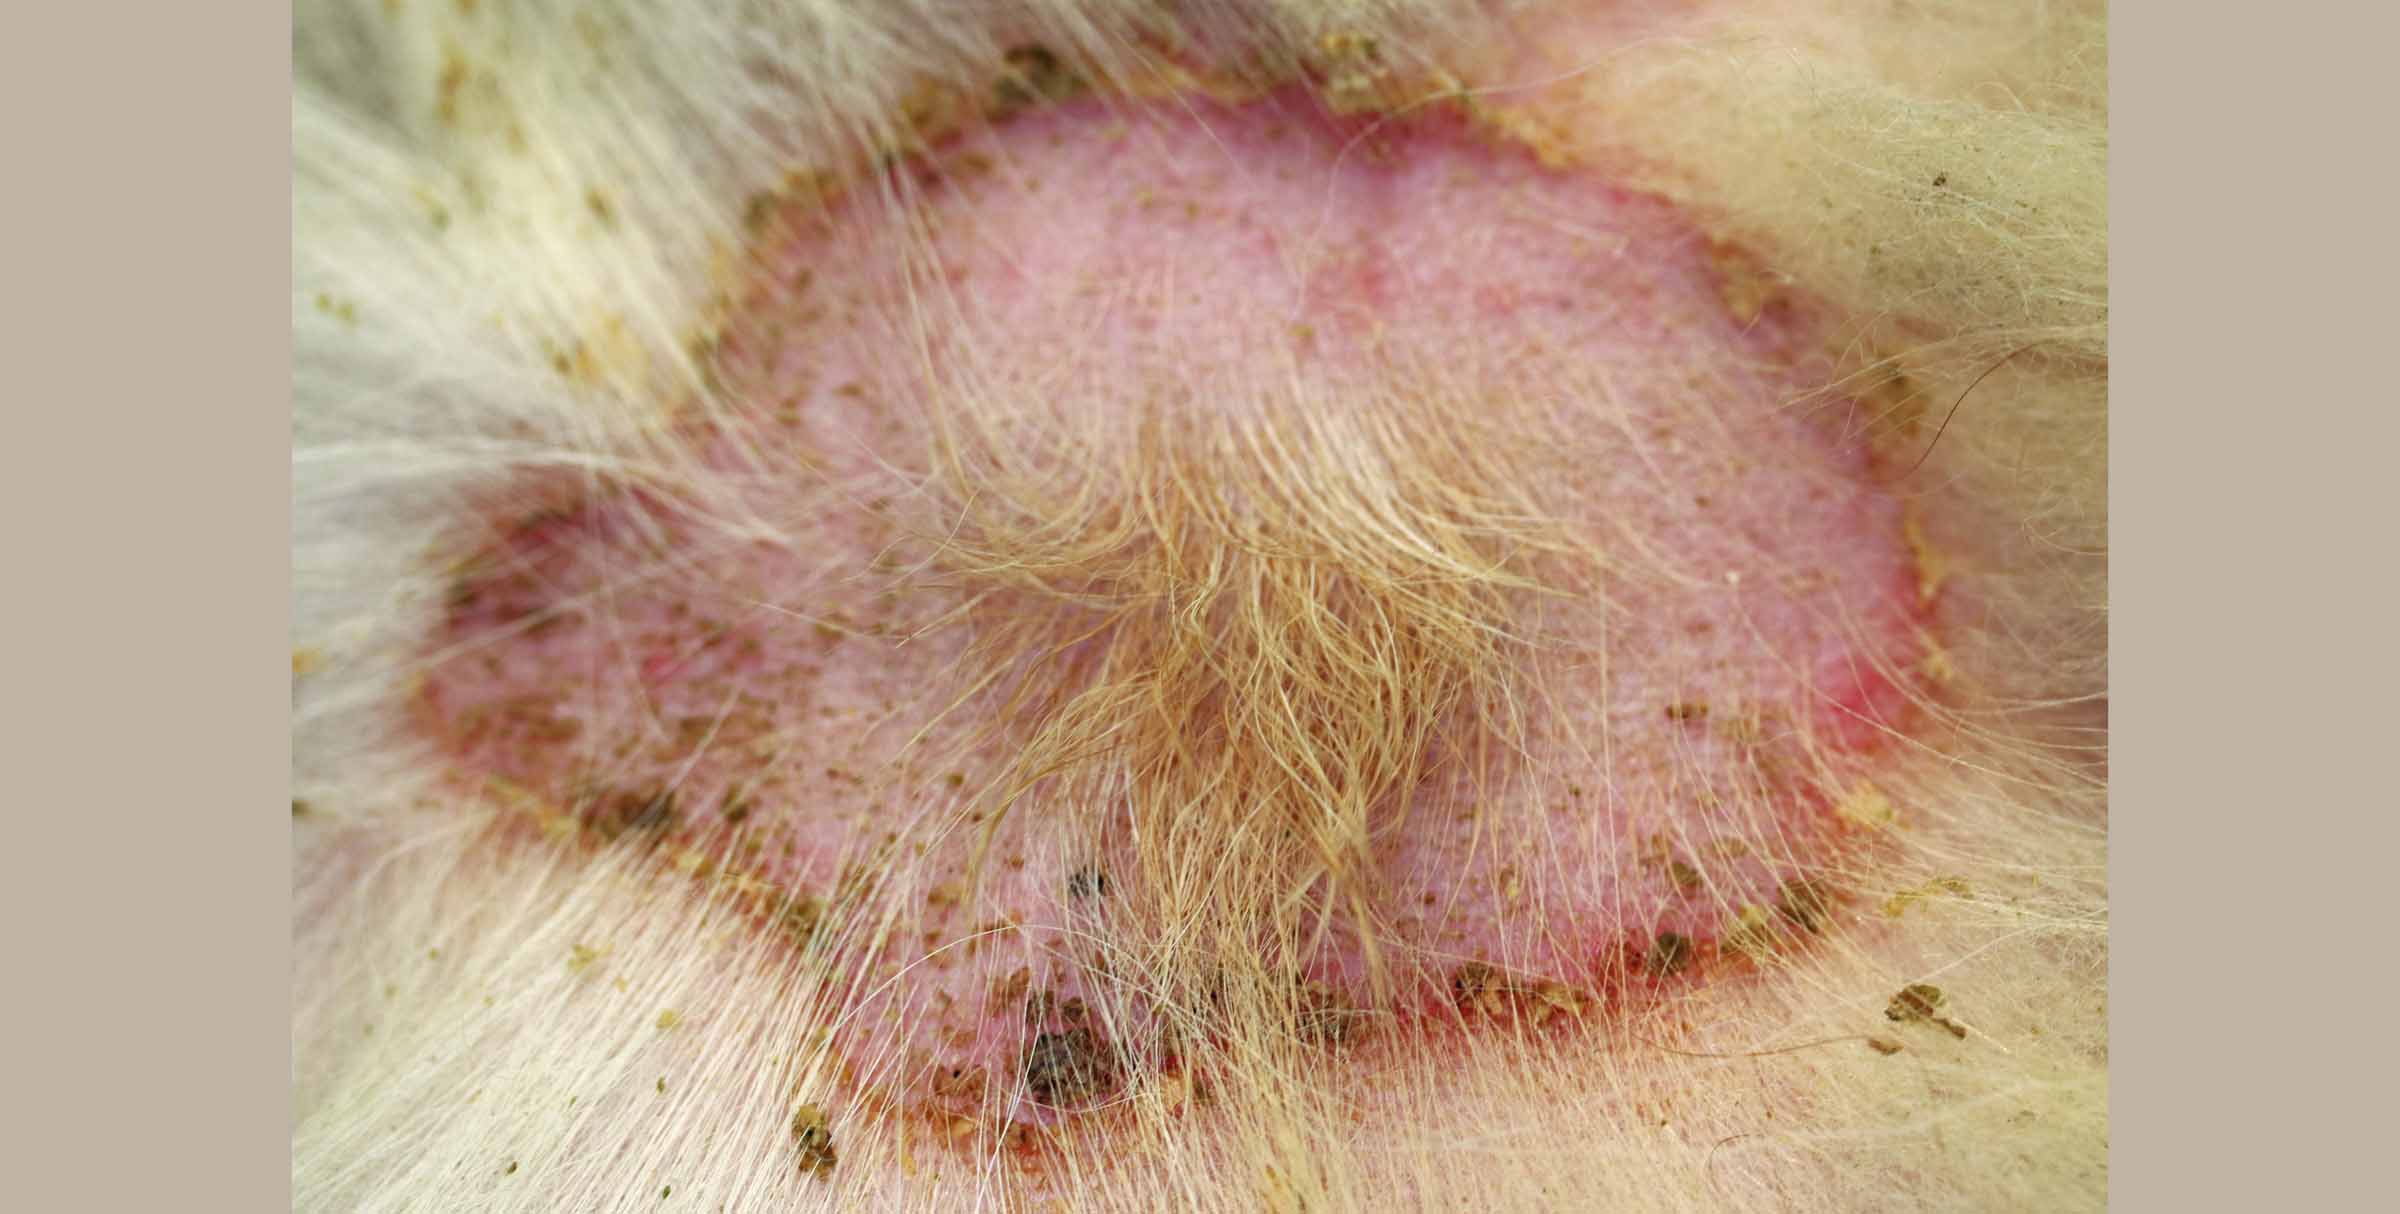 Staphylococcal (Pyoderma) - The Skin Vet